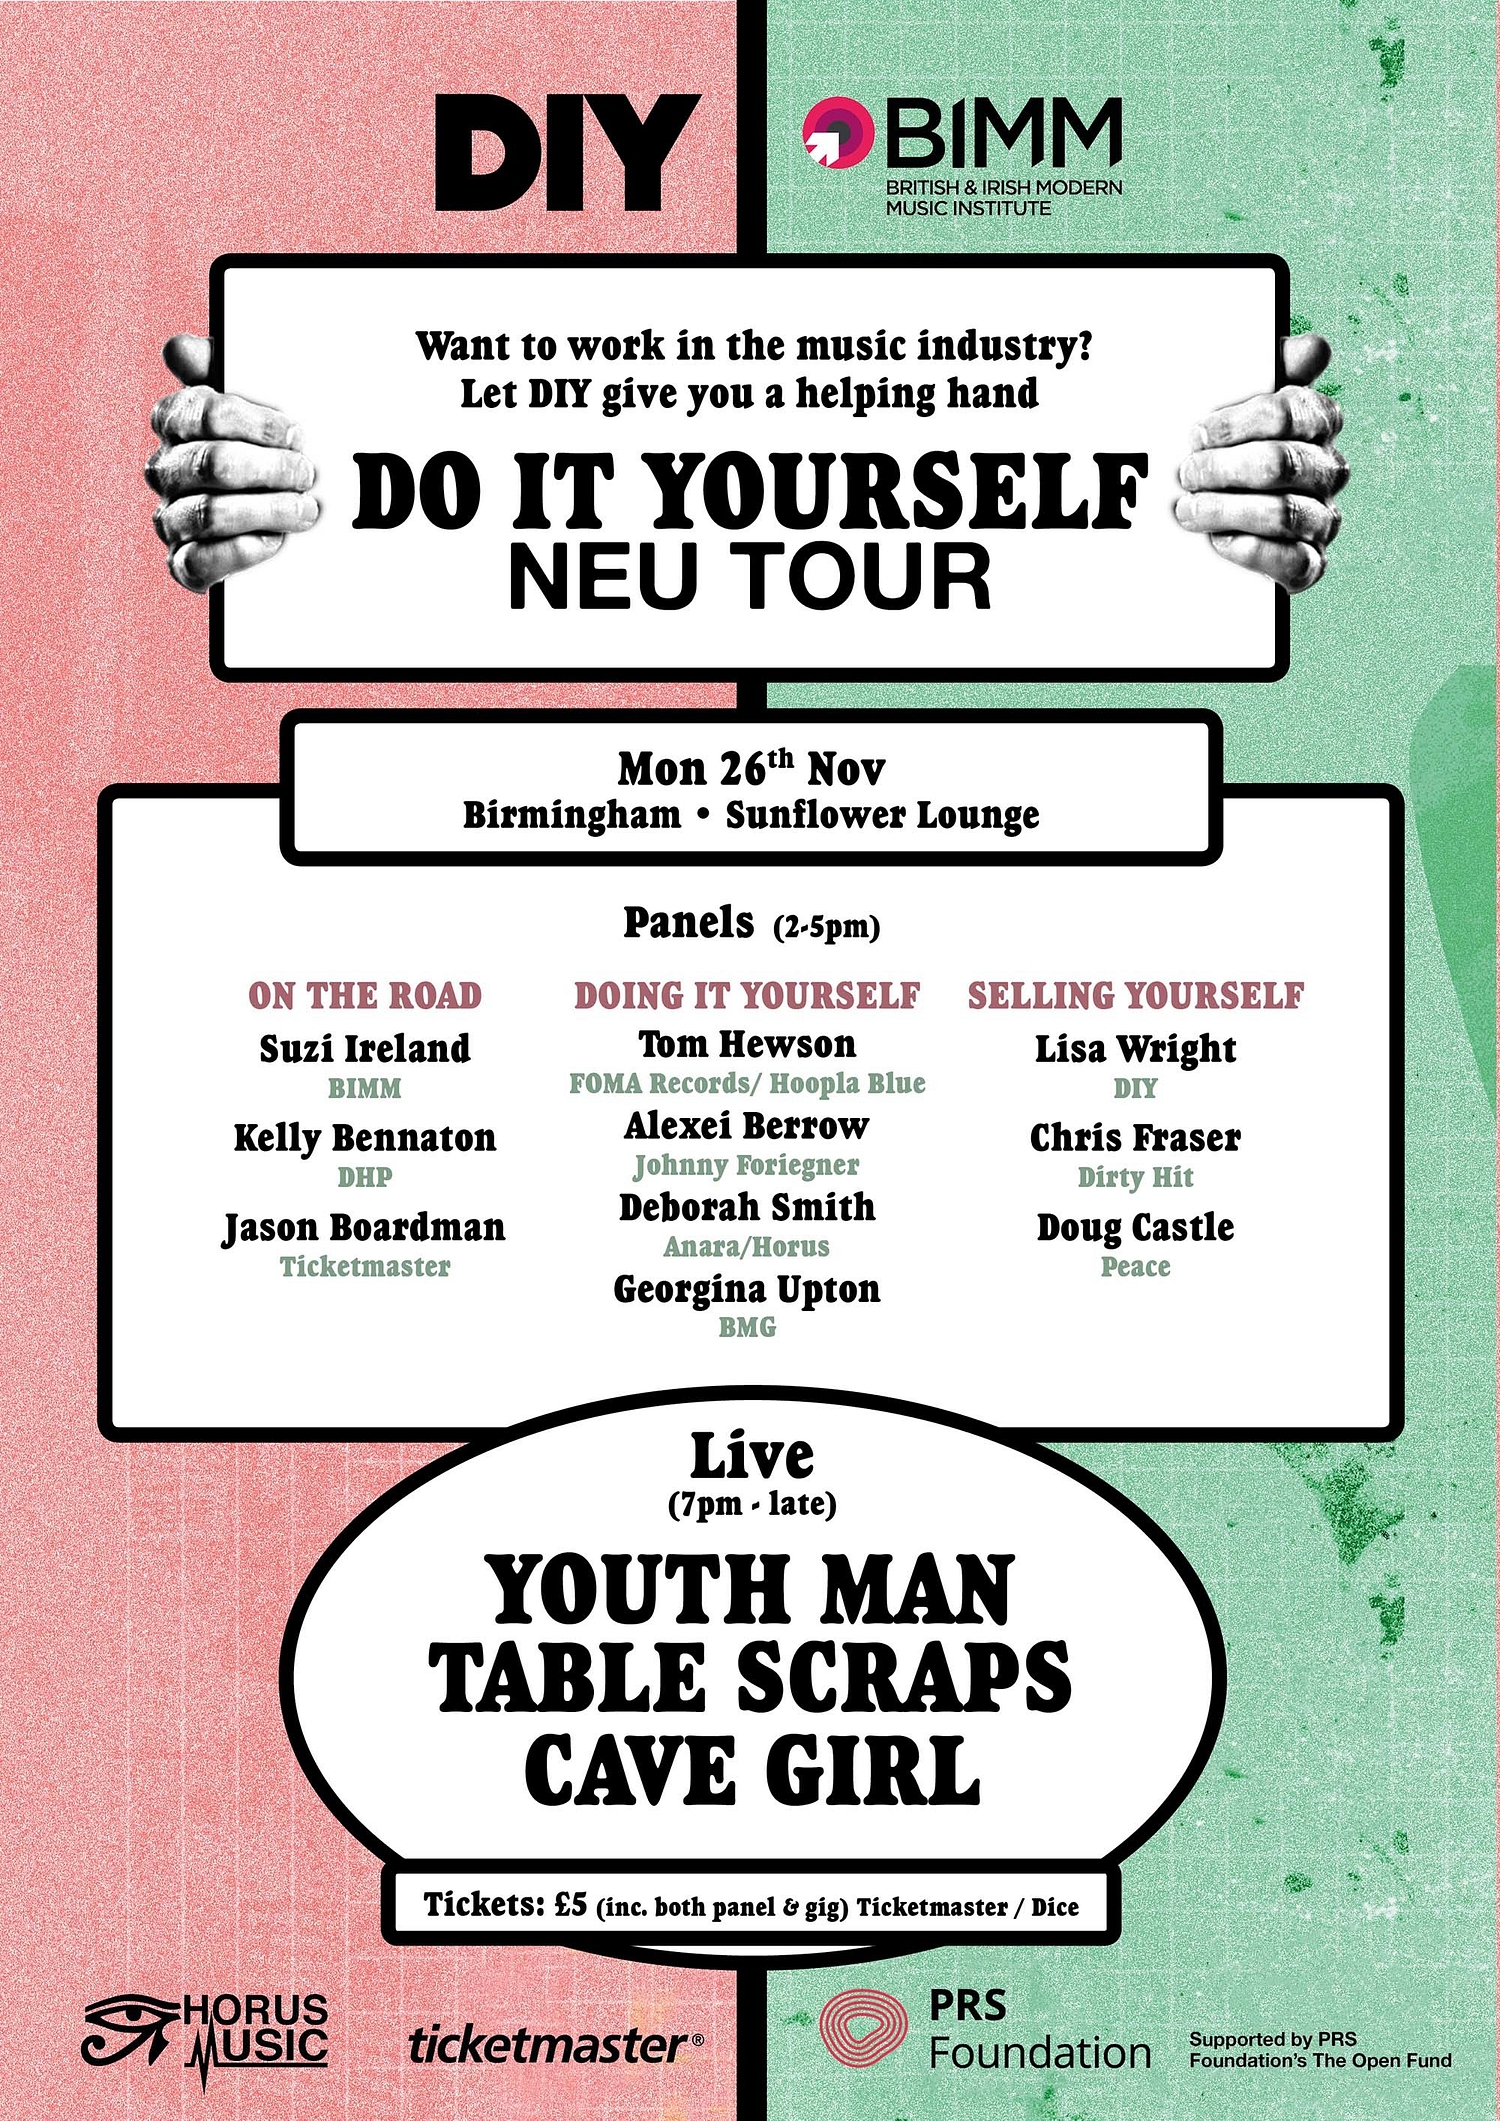 Peace, Pulled Apart by Horses, Dirty Hit, Live at Leeds and lots more to speak at DIY's Do It Yourself Neu Tour!